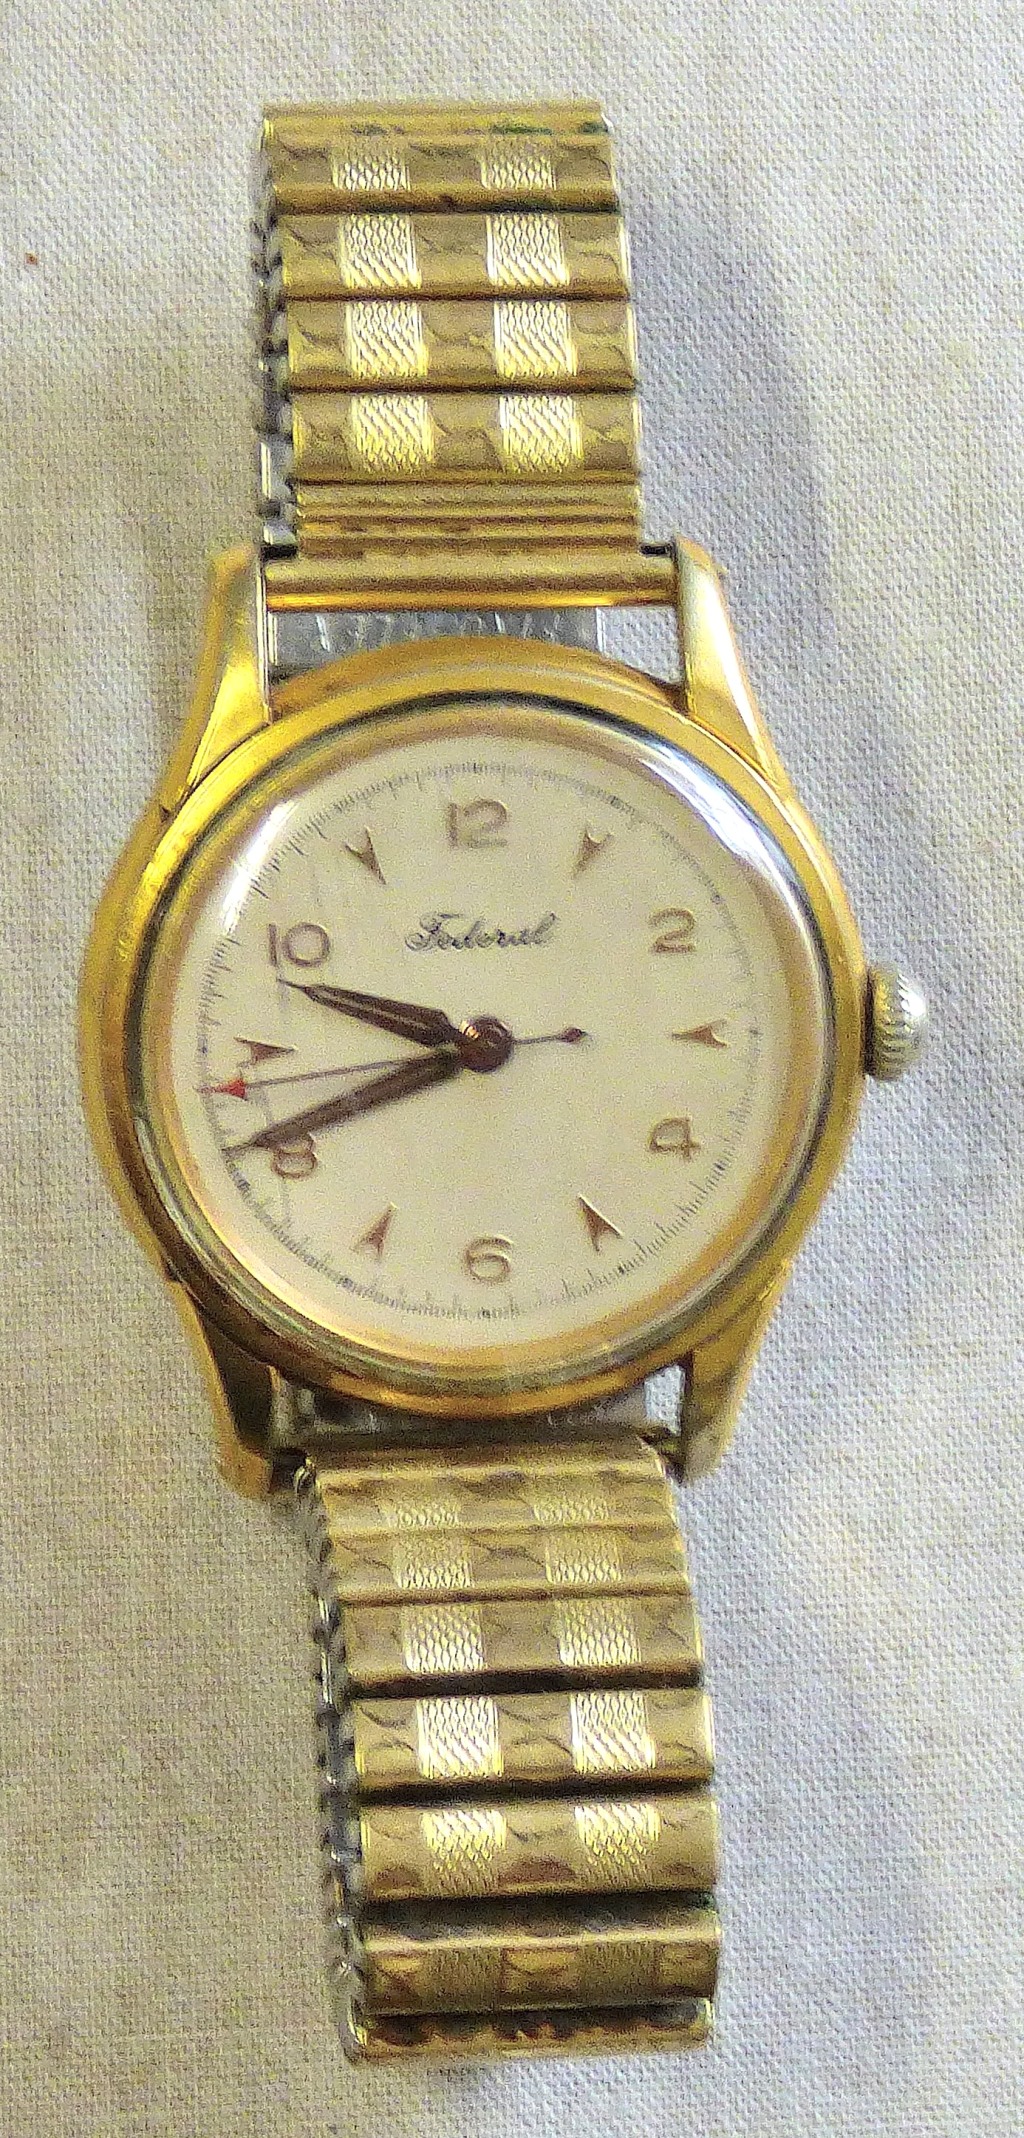 Wrist Watch - Brevete Roamer Federal Wrist Watch, Gold Plated in working order c1930s Sweep hand.